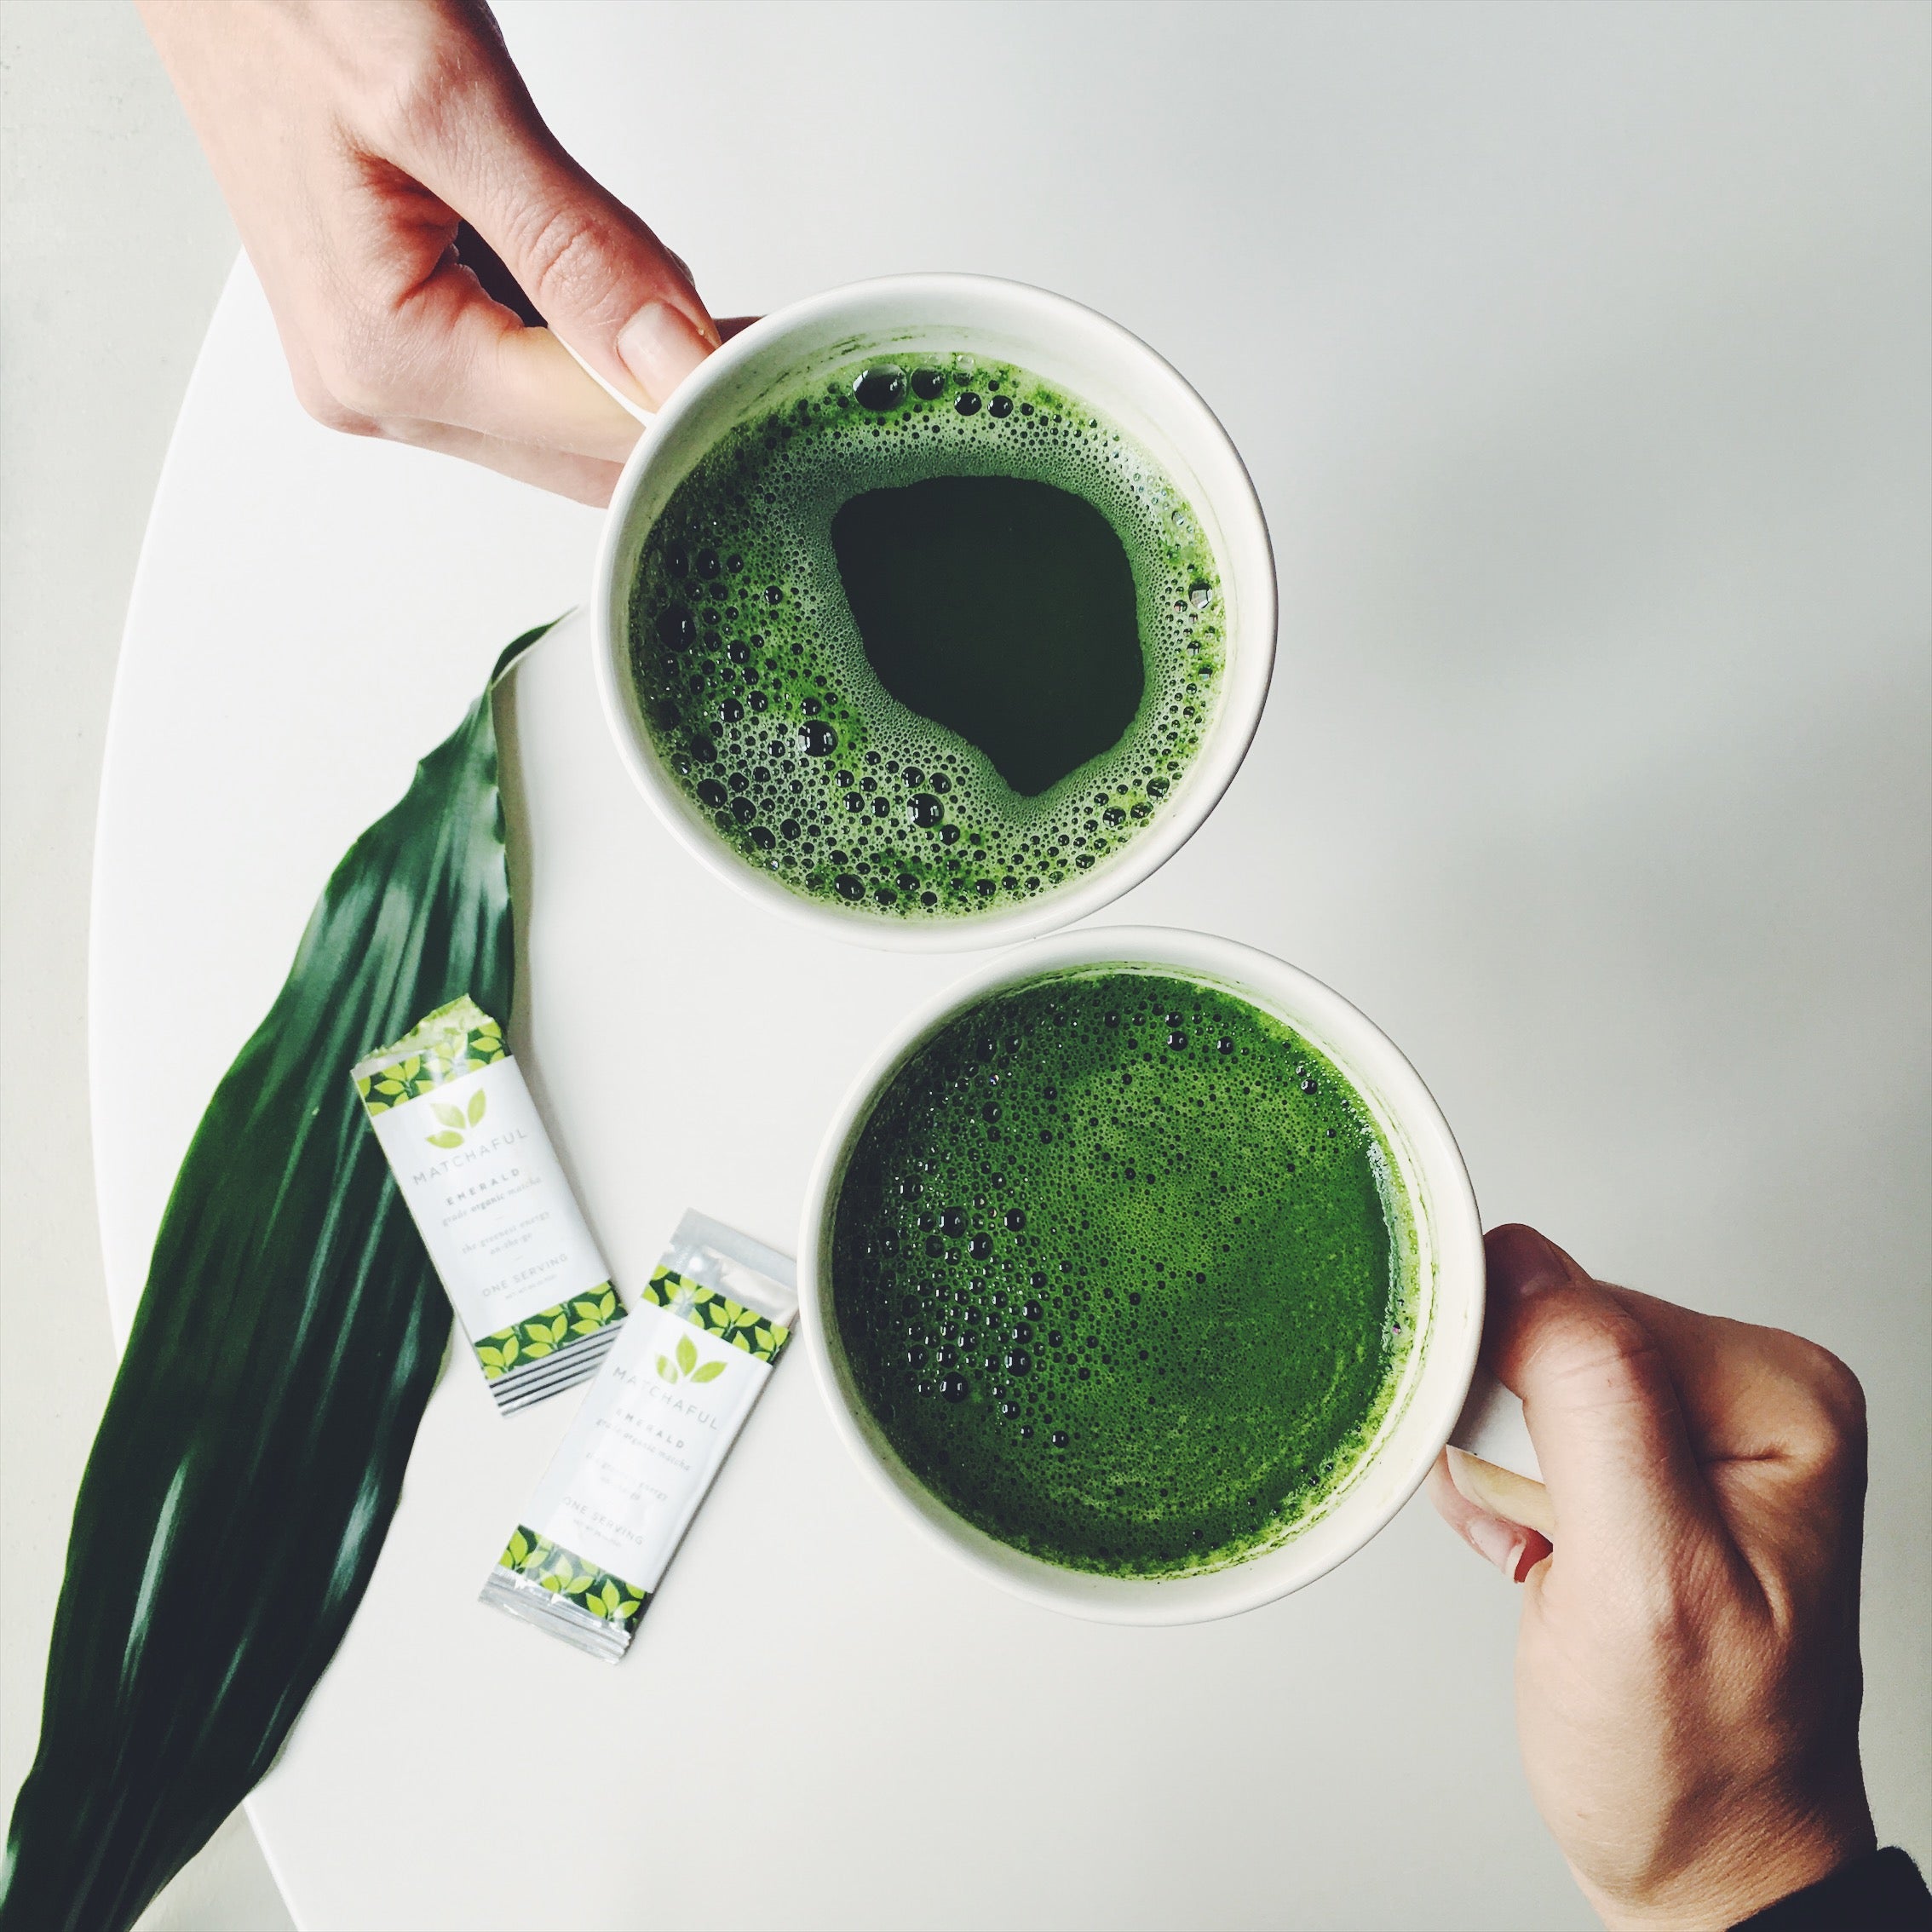 FIVE Things to Know About Matcha